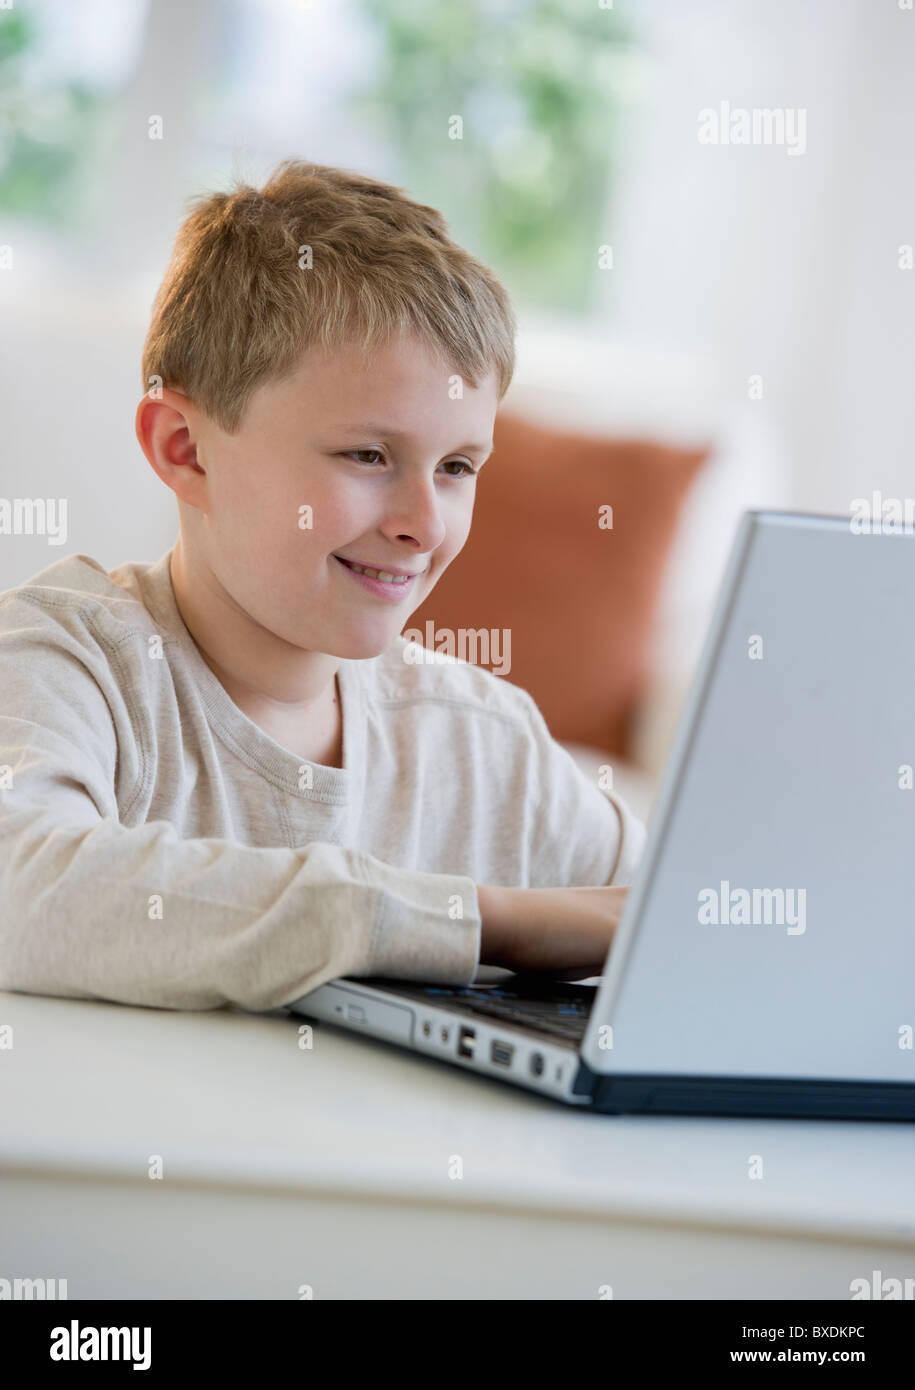 Young boy looking at laptop Stock Photo